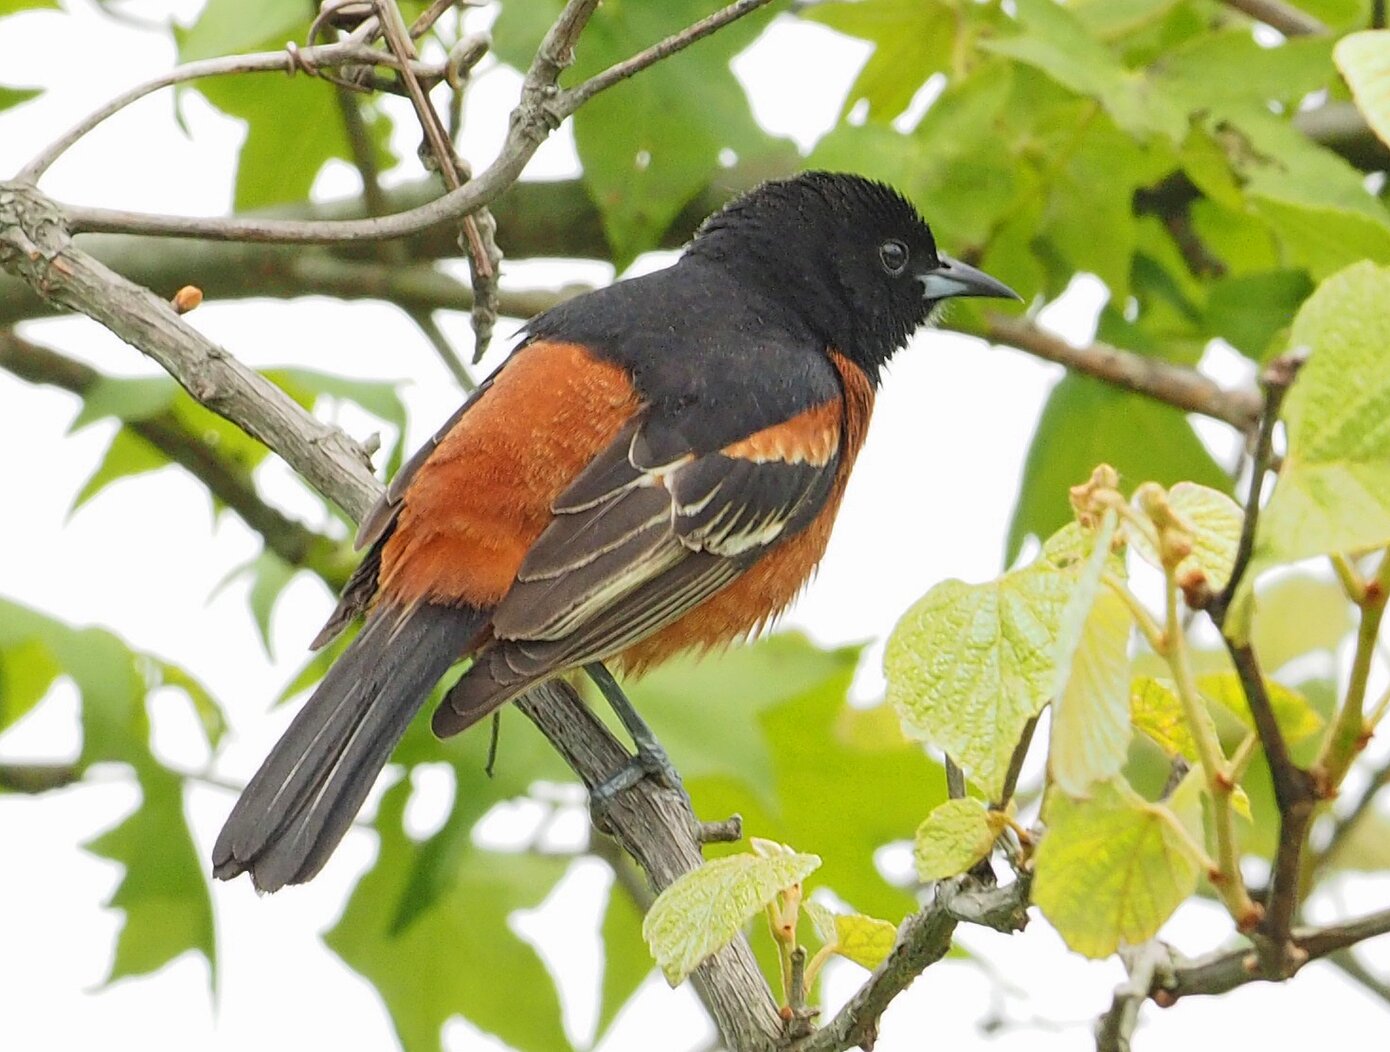 Both Baltimore and Orchard Orioles nest in Fort Washington Park. Photo: Judy Gallagher/CC BY 2.0